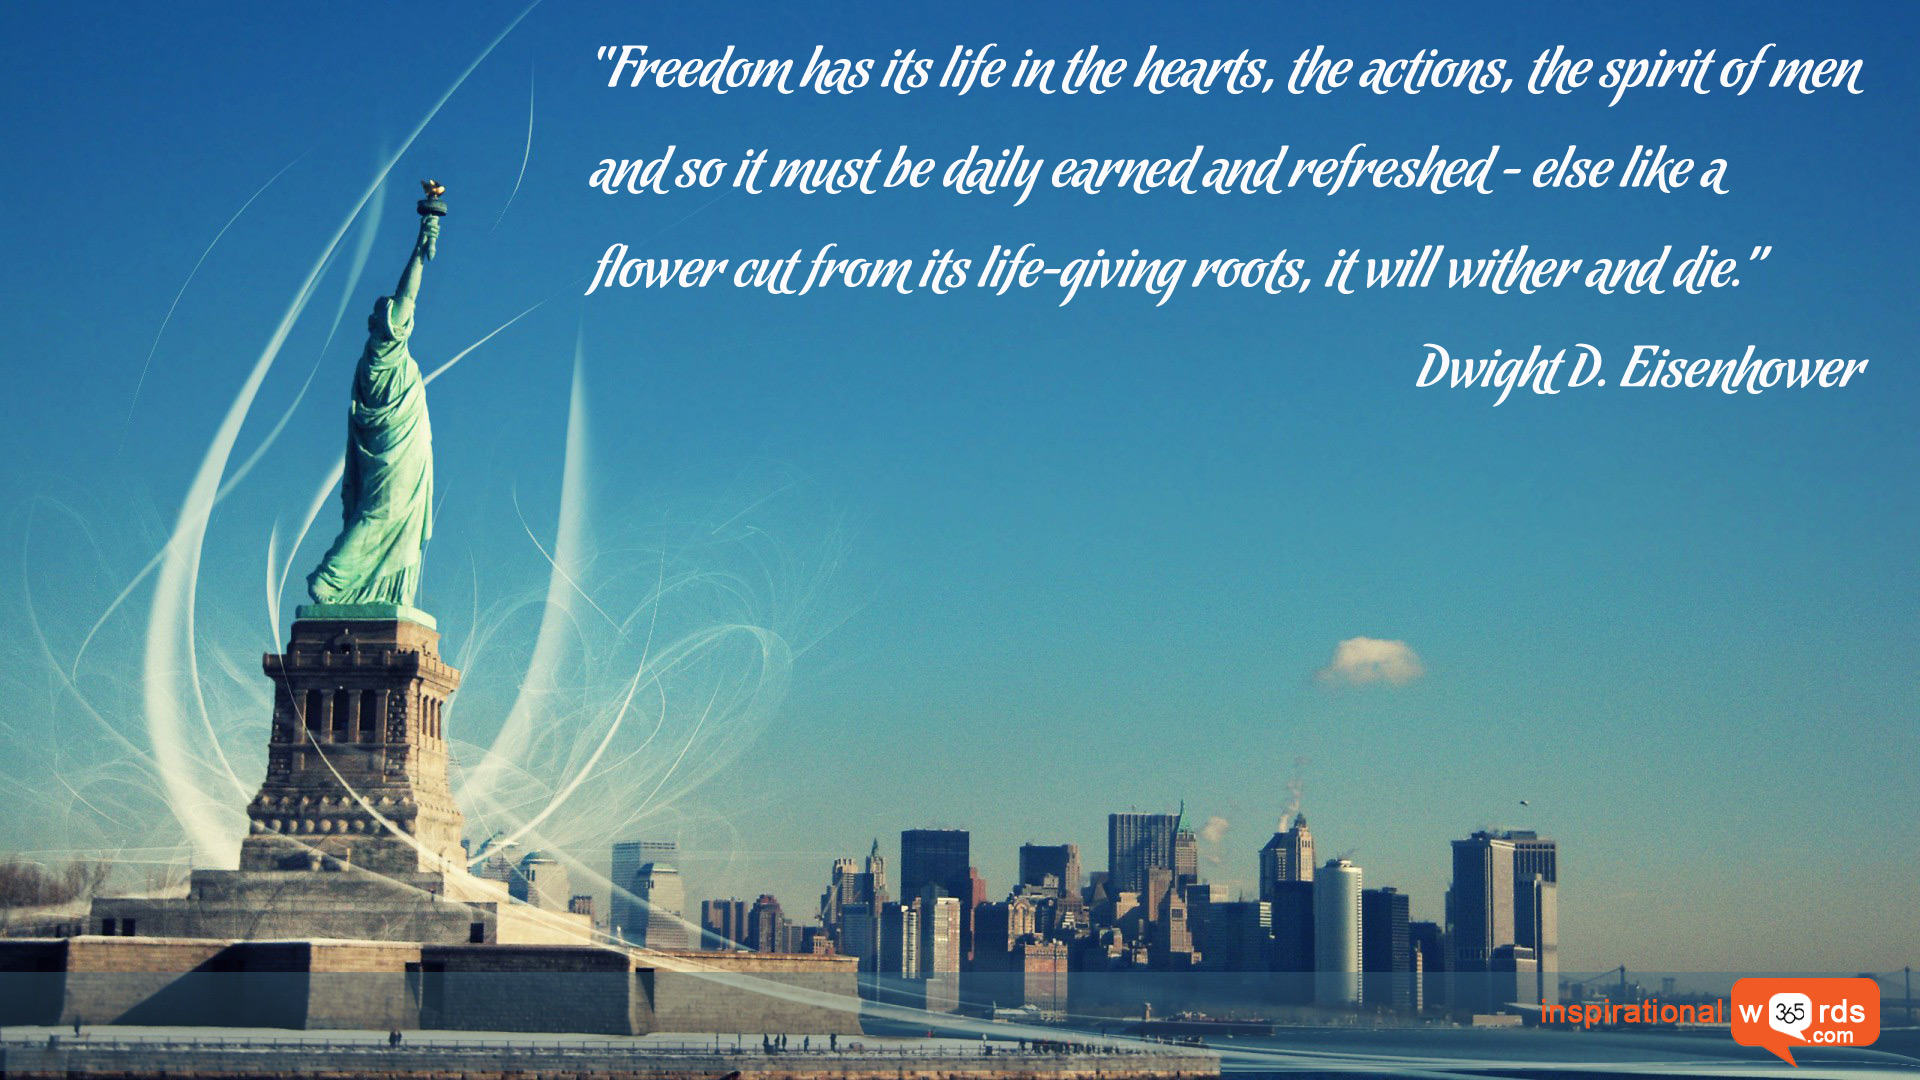 Inspirational Wallpaper Quote By Dwight D - Statue Of Liberty - HD Wallpaper 